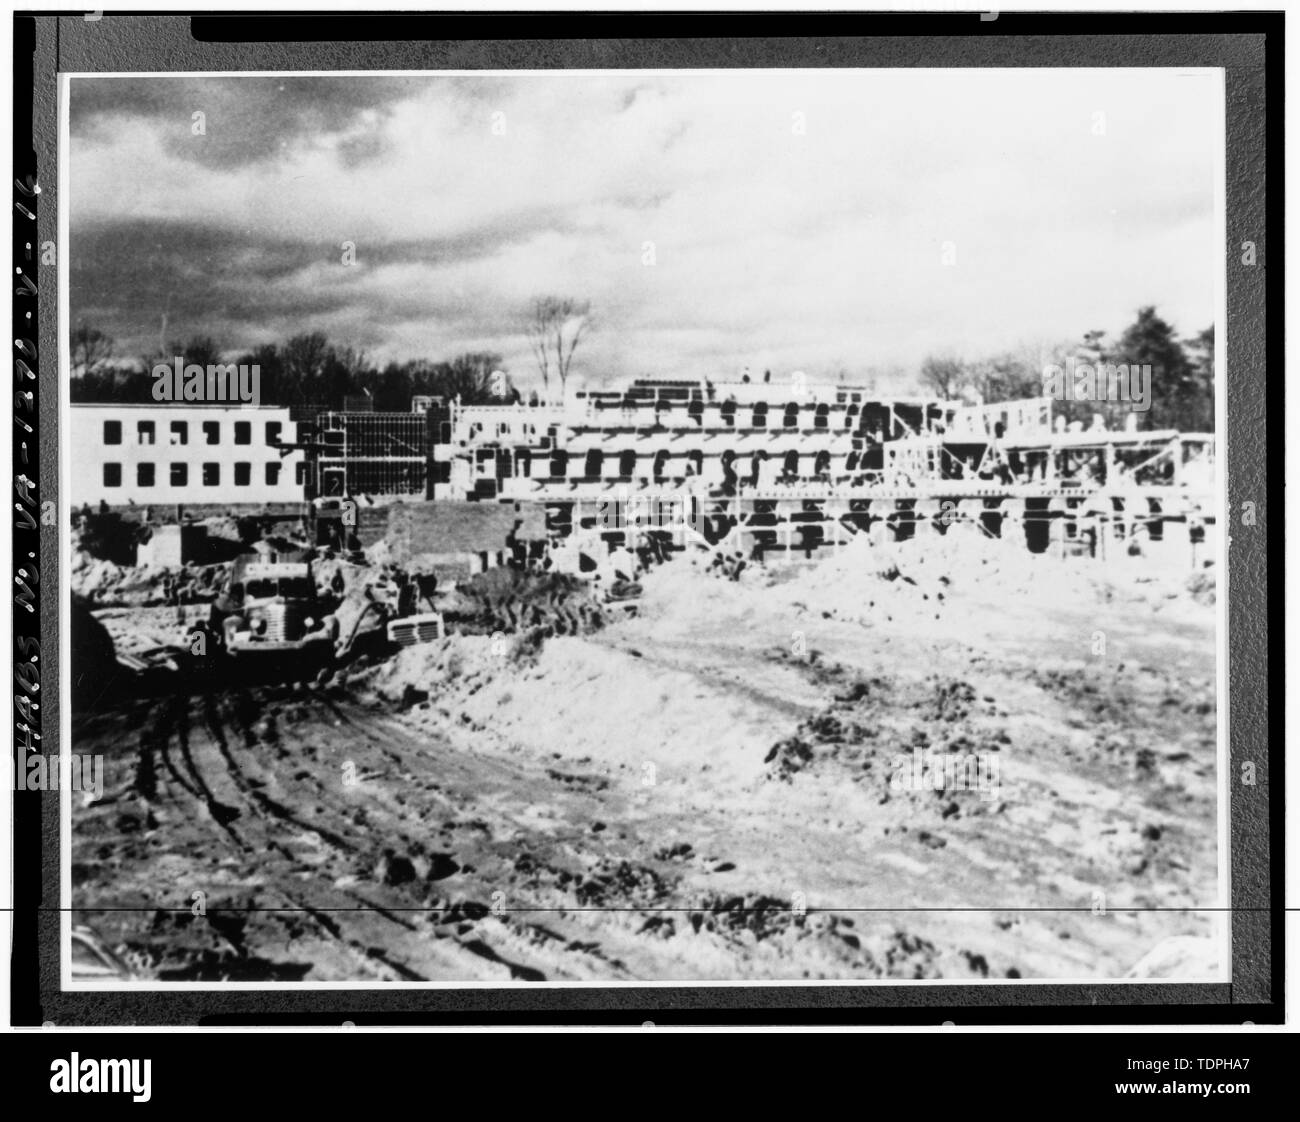 1942 (original print on file at U.S. Army Intelligence Security Command, Fort Belvoir, Virginia). VIEW OF CONSTRUCTION OF BUILDING 401. - Arlington Hall Station, Building No. 401, 4000 Arlington Boulevard, Arlington, Arlington County, VA; Van Dyke, Tina, transmitter Stock Photo